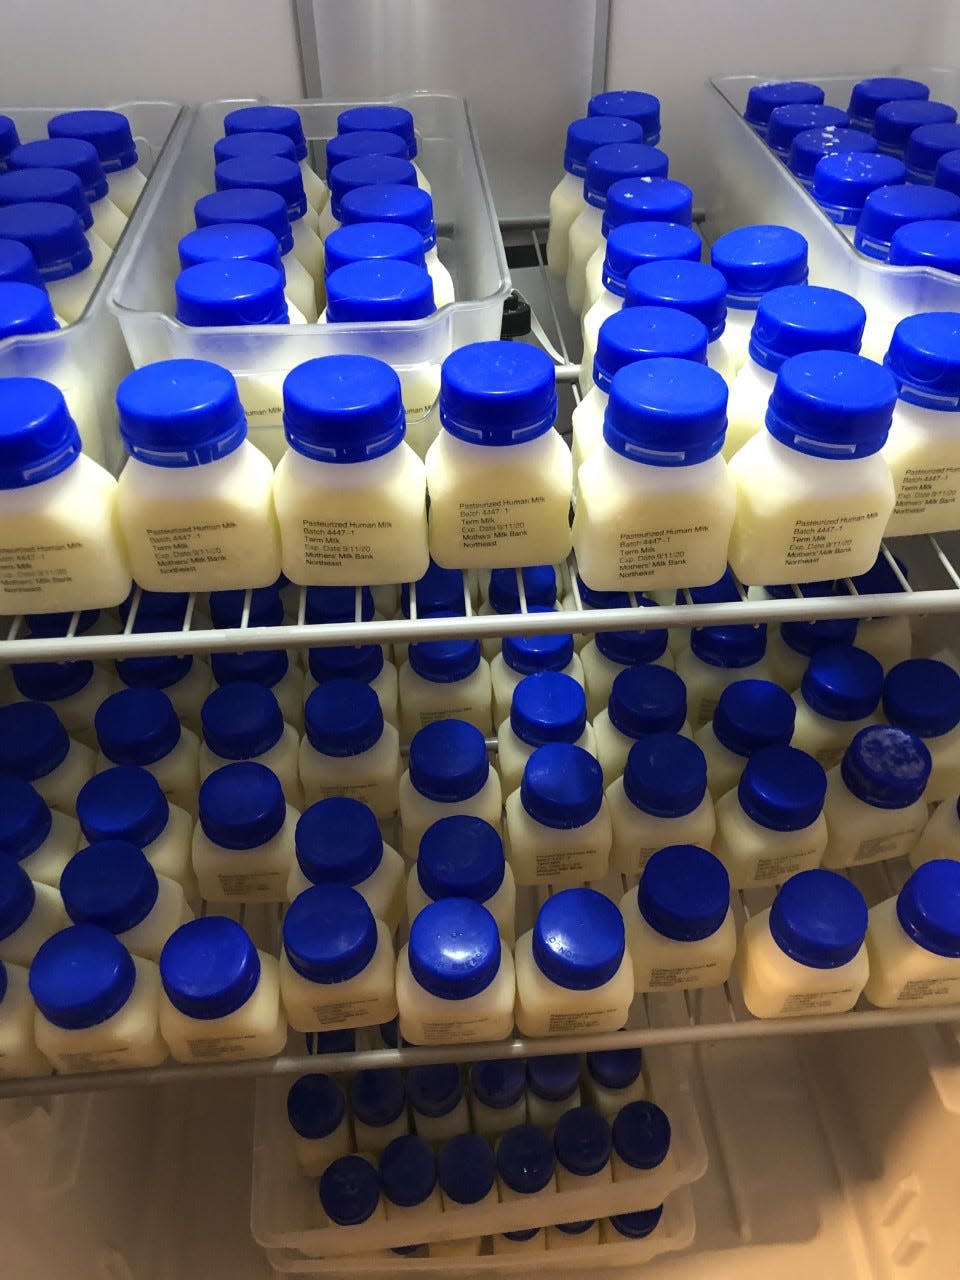 The Vermont Donor Milk Center in Essex Junction is stocked up and ready to help families with their infant feeding needs.  The opening on Jan. 6, 2020 made it the first milk bank in the state.